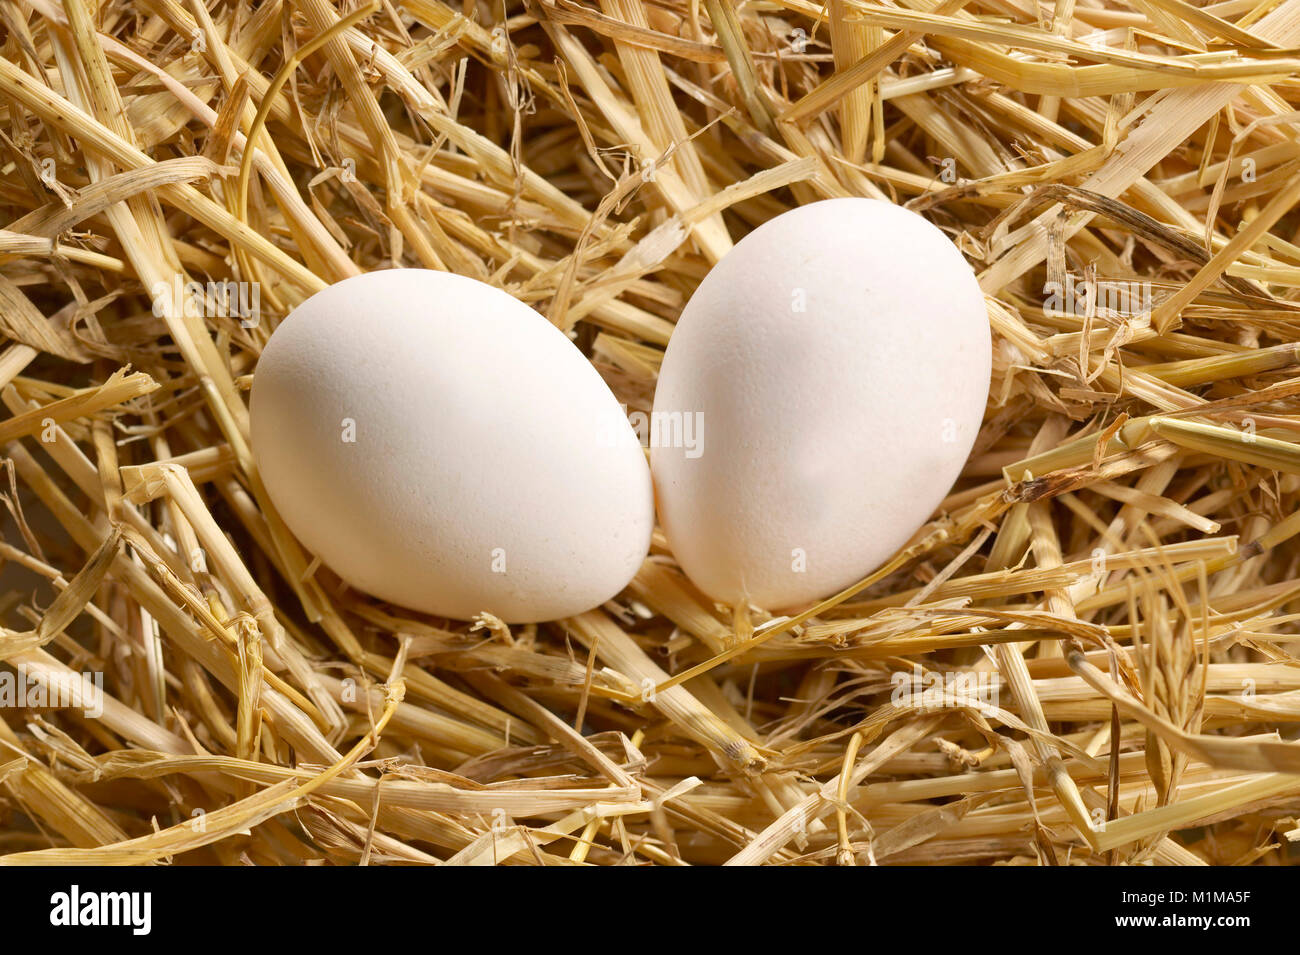 Domestic Chicken. Two eggs in straw. Germany Stock Photo